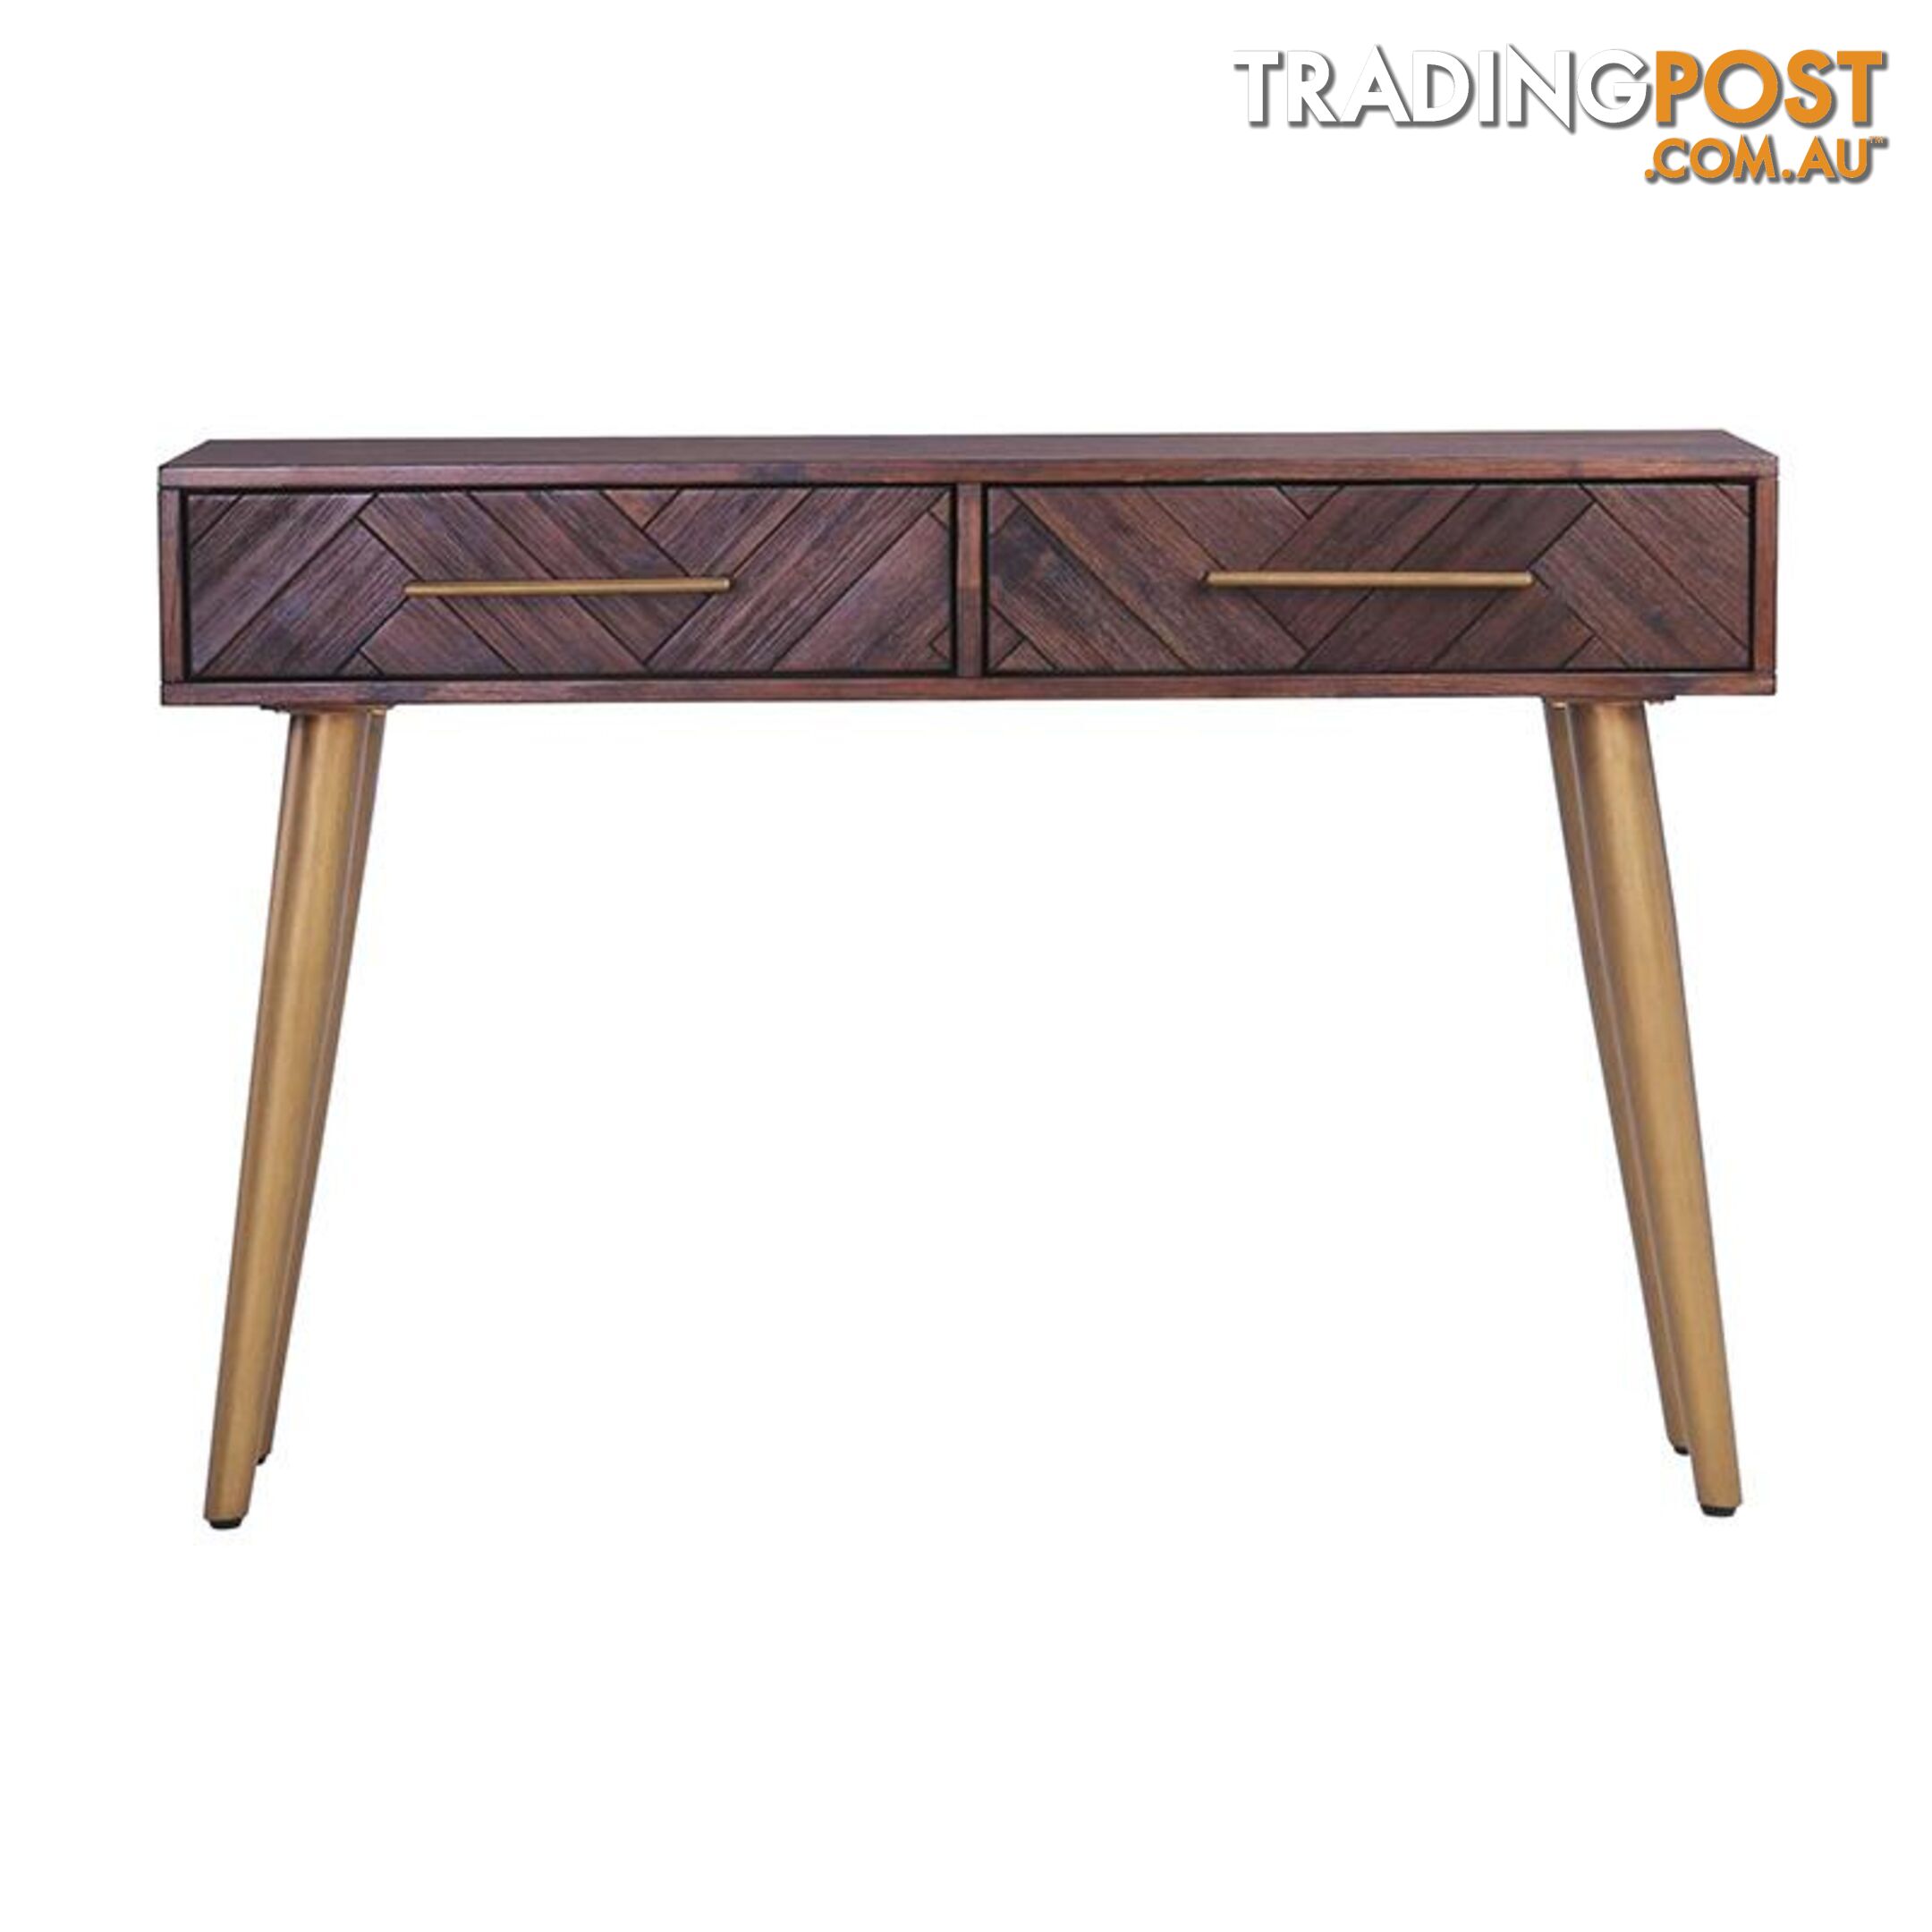 SIVAN Console Table 120cm Acacia Solid Wood - Brown - 134011 - 9334719005263